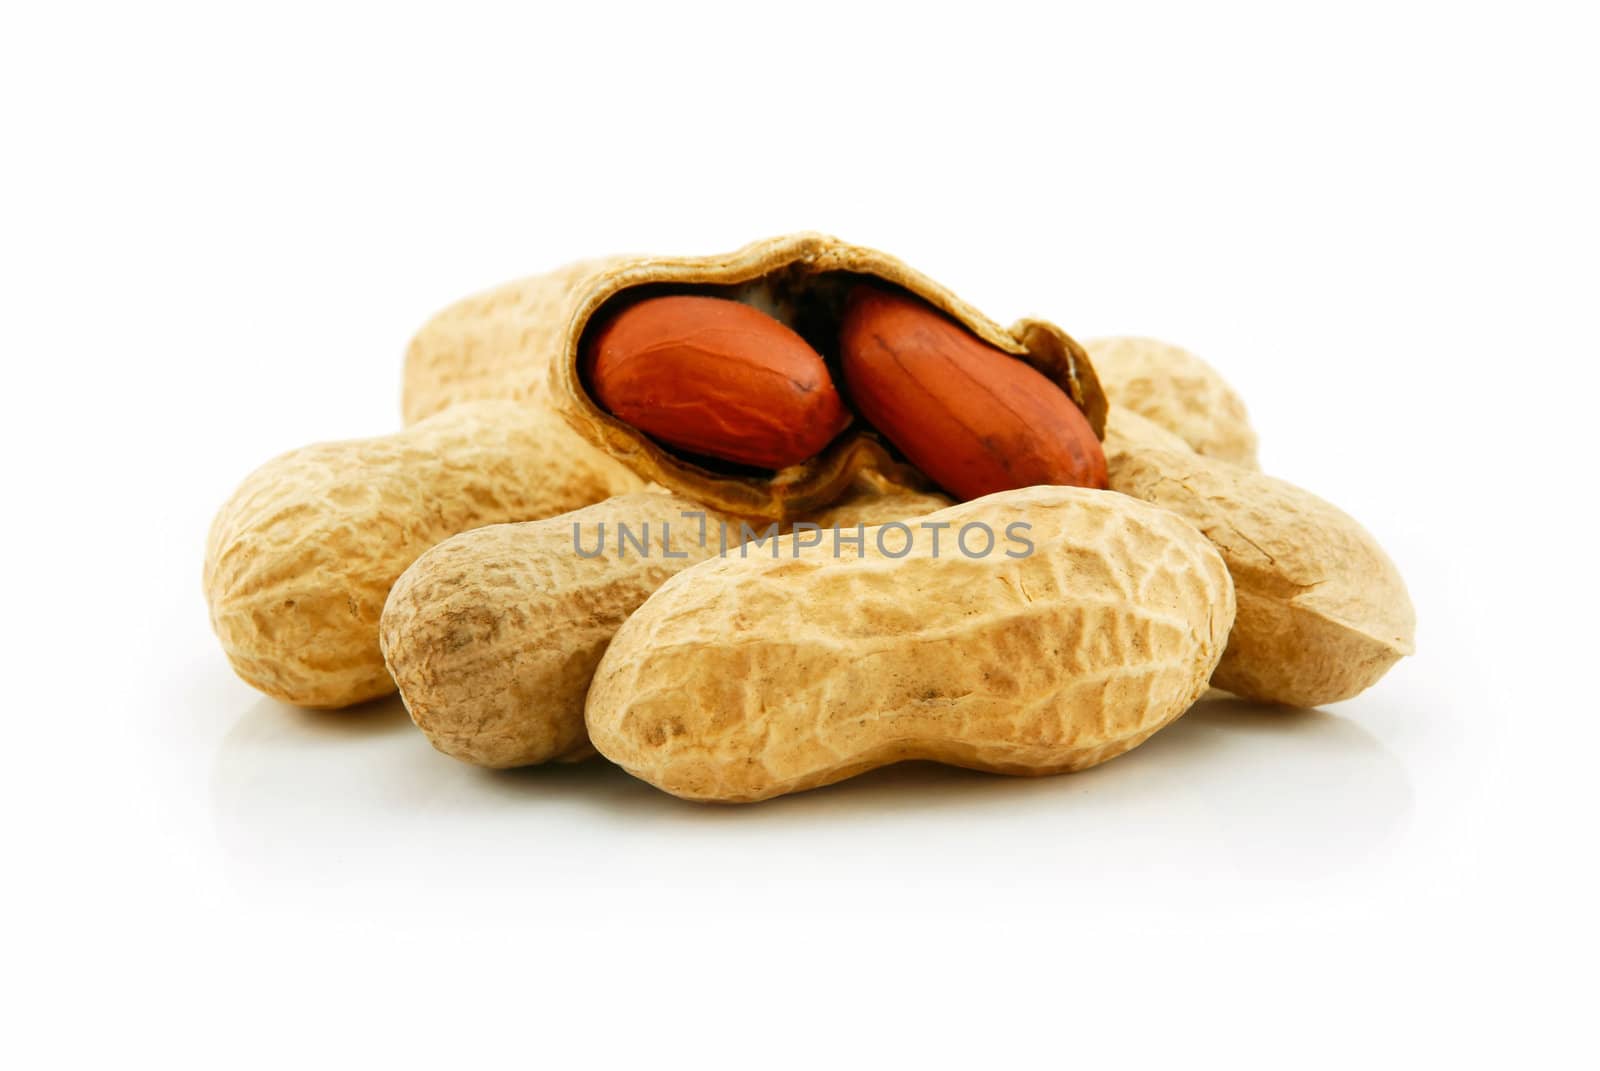 Ripe Dried Peanut Isolated on White Background